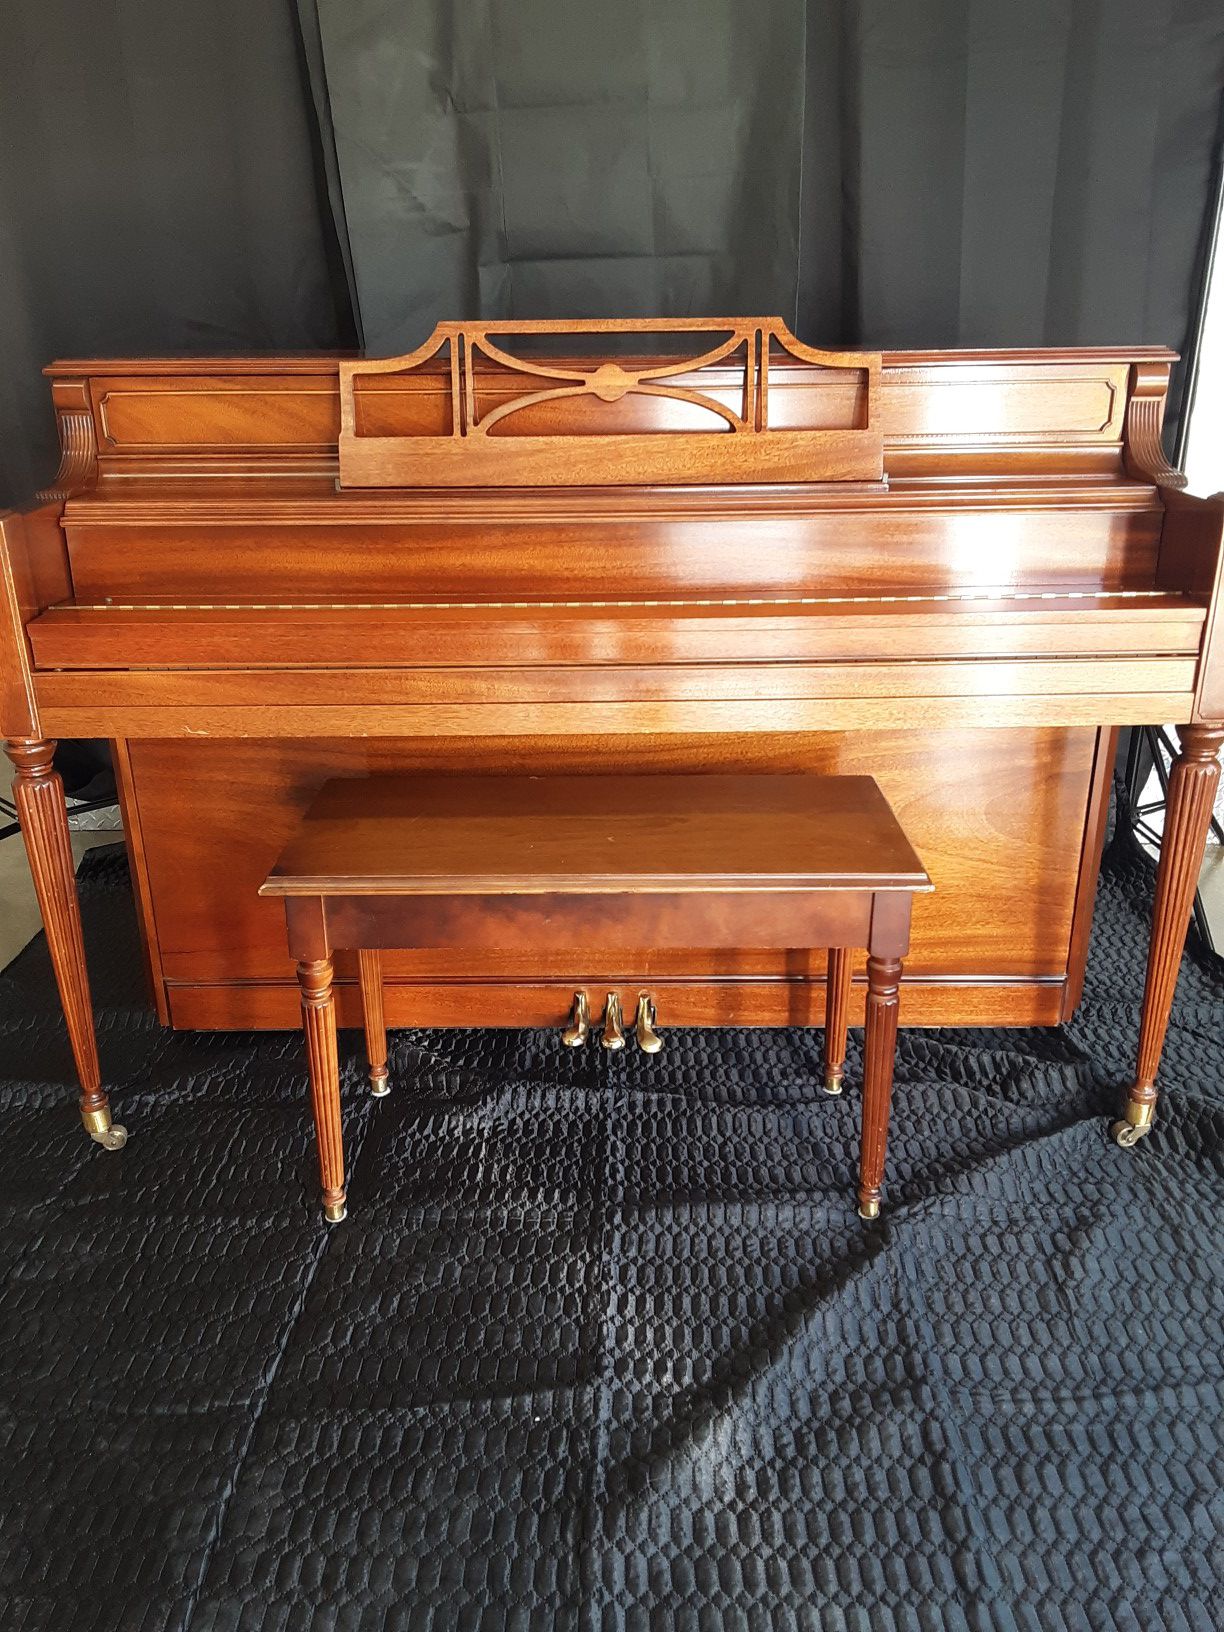 Make Best Offer! Must Go! Story and Clark Upright Piano